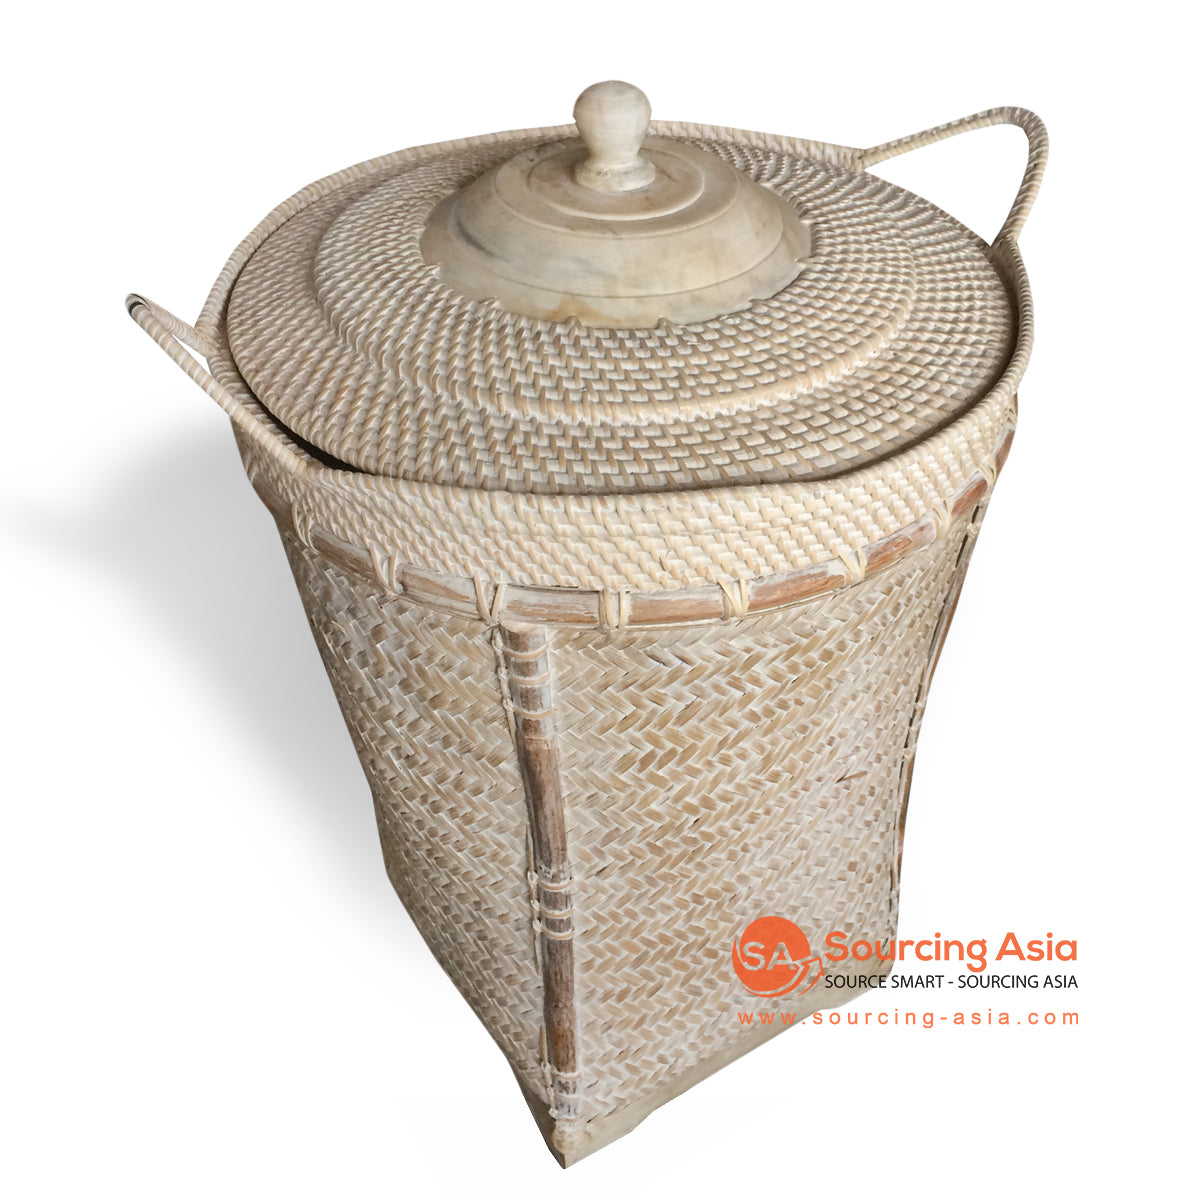 ALI056 WHITE WASH WOVEN BAMBOO LAUNDRY BASKET WITH LID